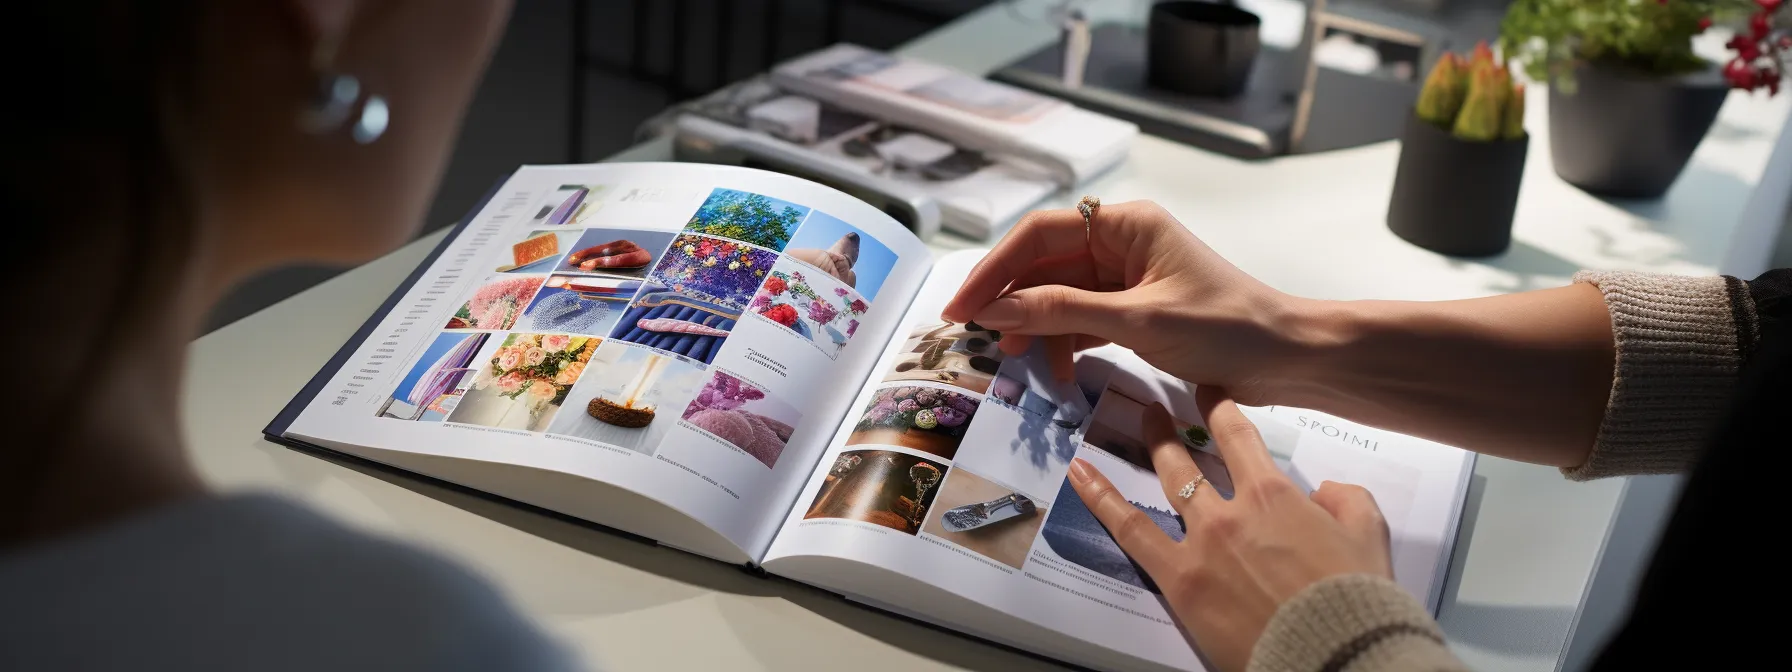 A Person Holding A Brand Identity Guidebook With Various Visual Elements Displayed On The Pages.